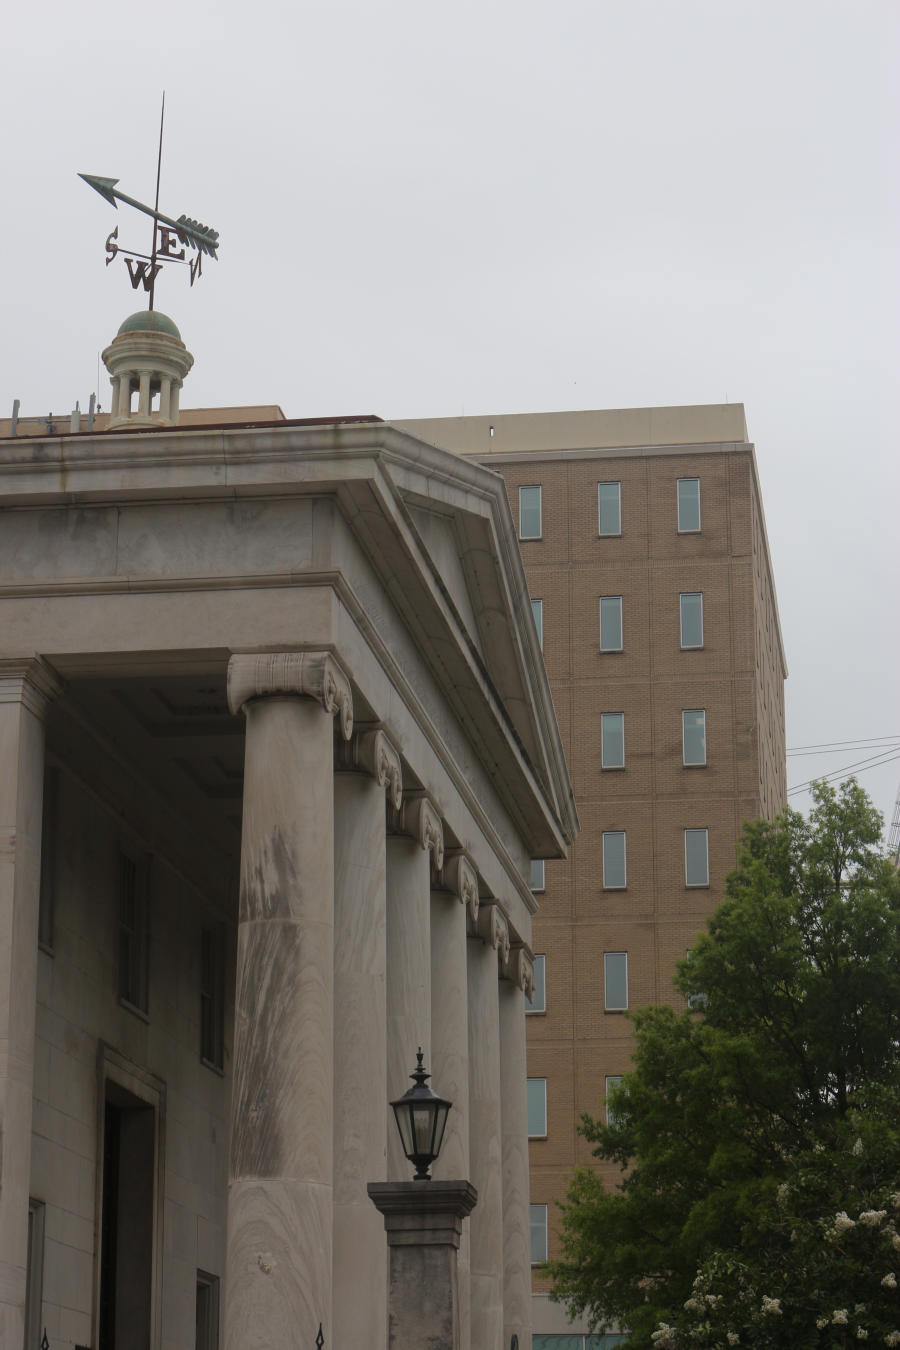 Once part of the previous Courthouse, the weather vane and cupula are now part of the First National Bank in Huntsville.